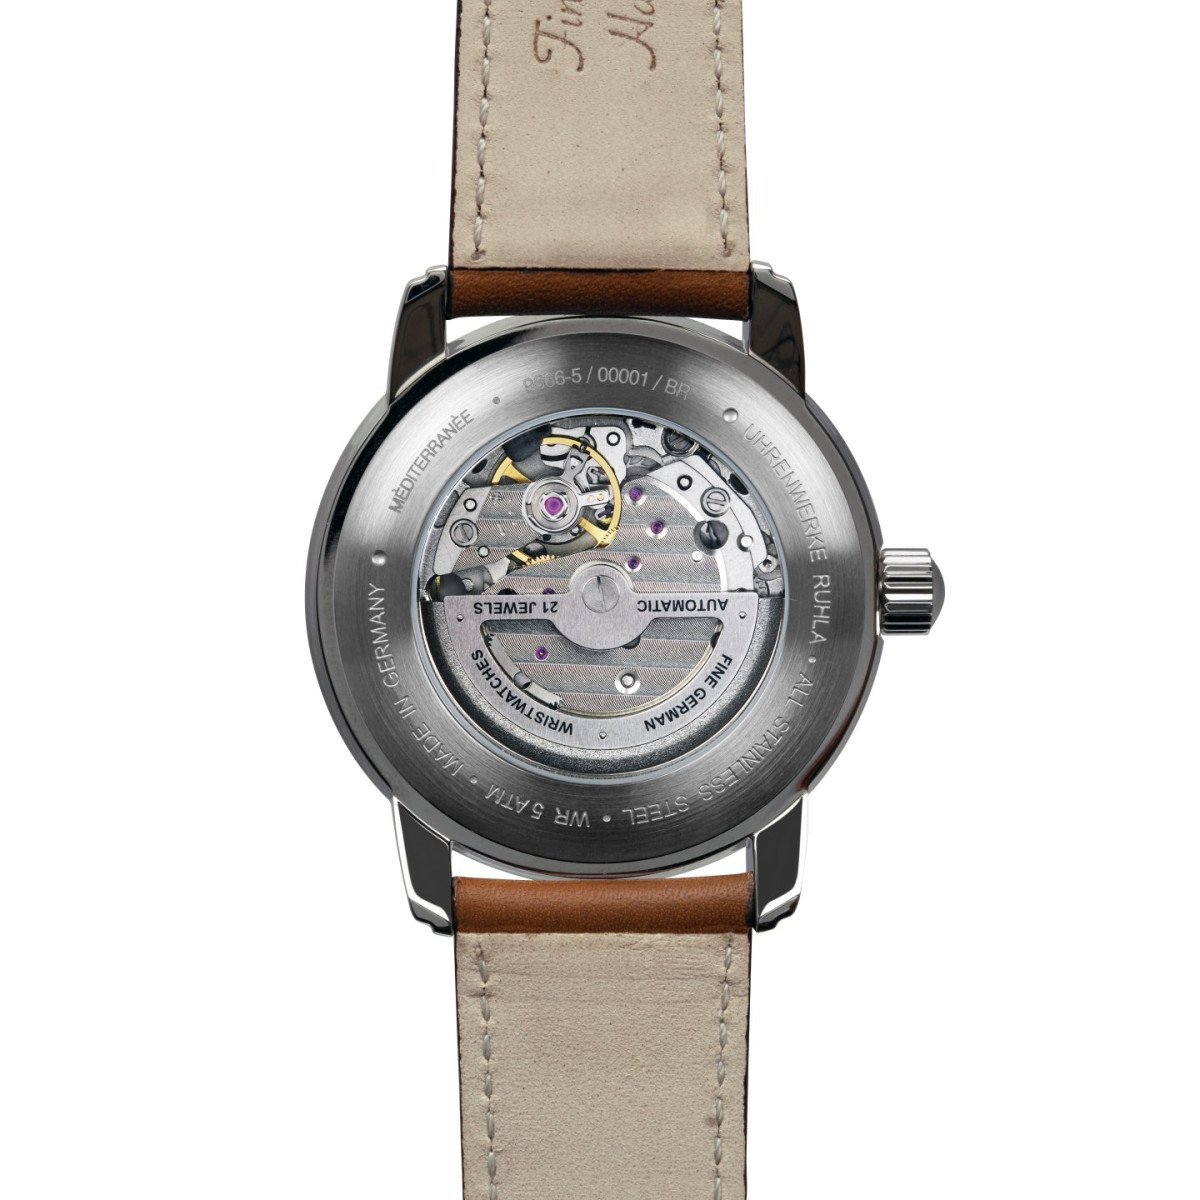 Zeppelin Méditerranée Automatic with Open Heart and leather strap